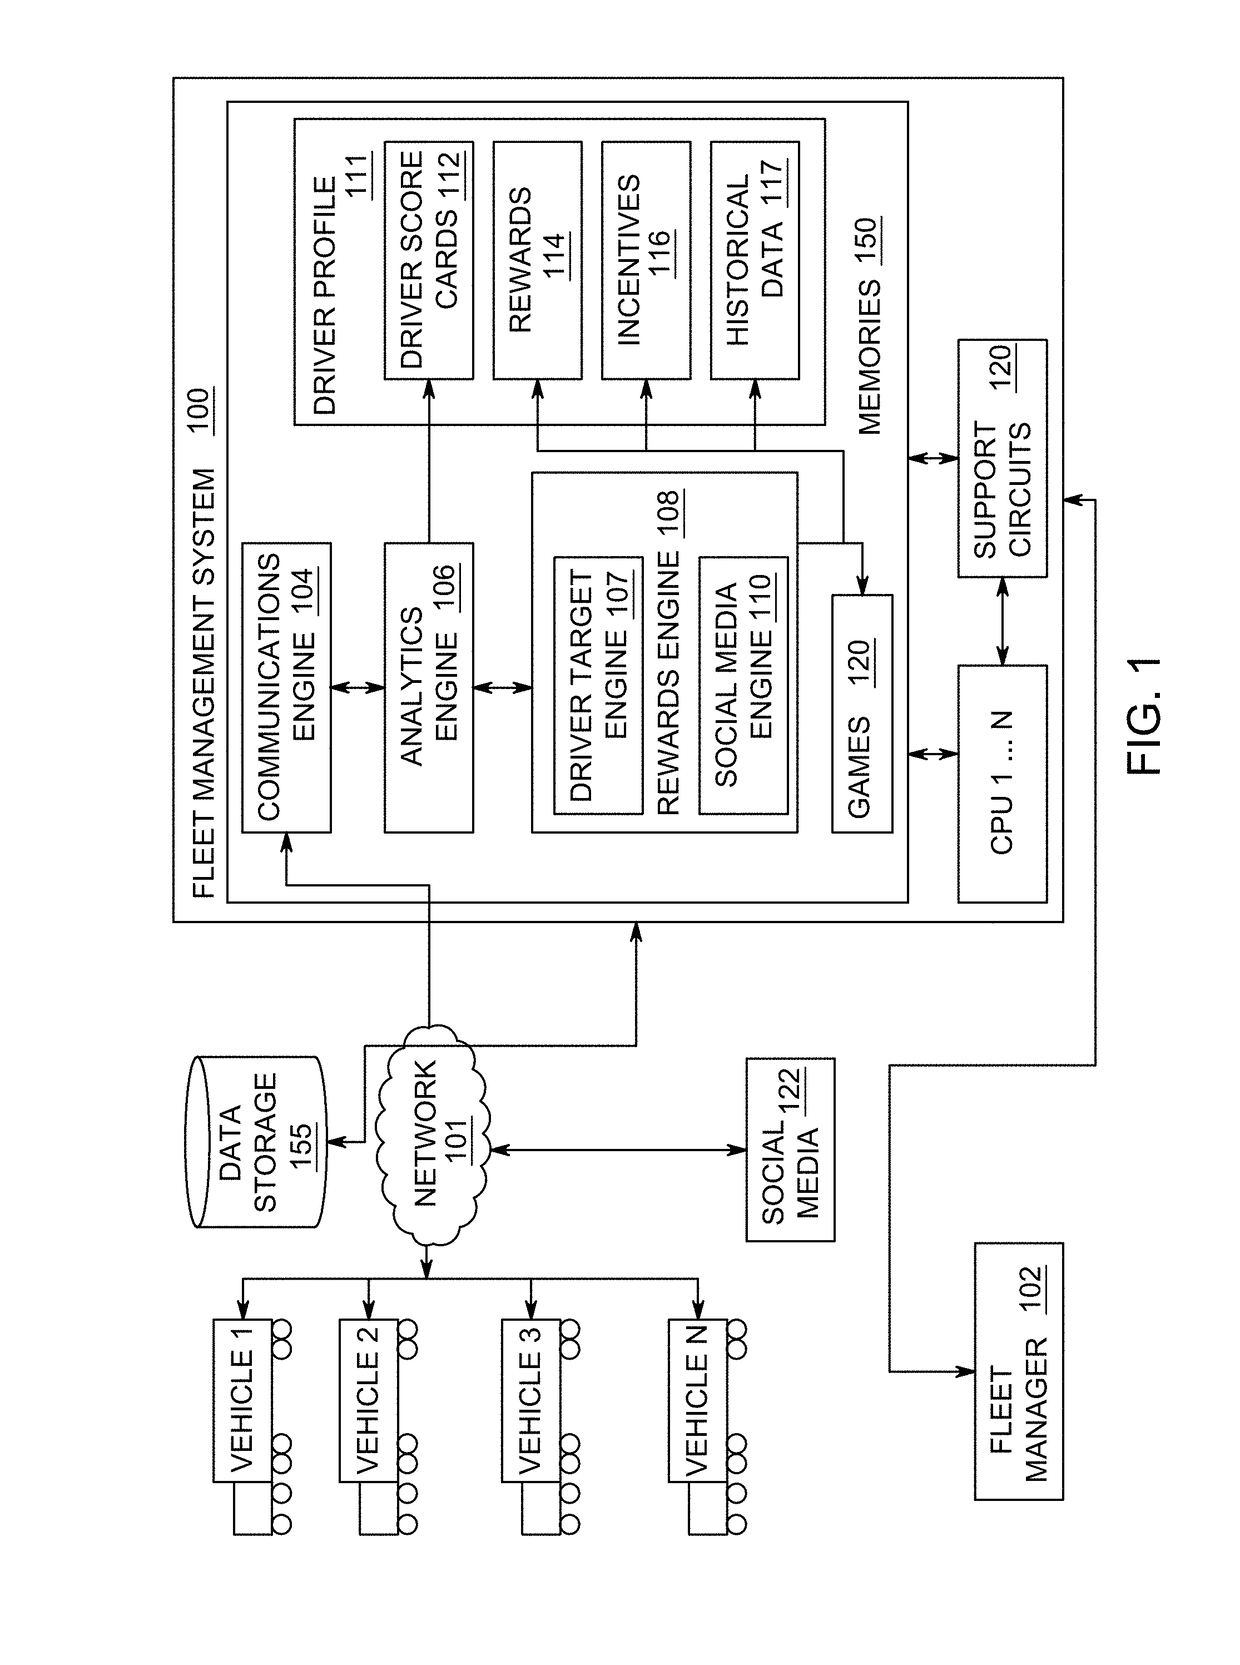 Method and apparatus for evaluating driver performance and determining driver rewards